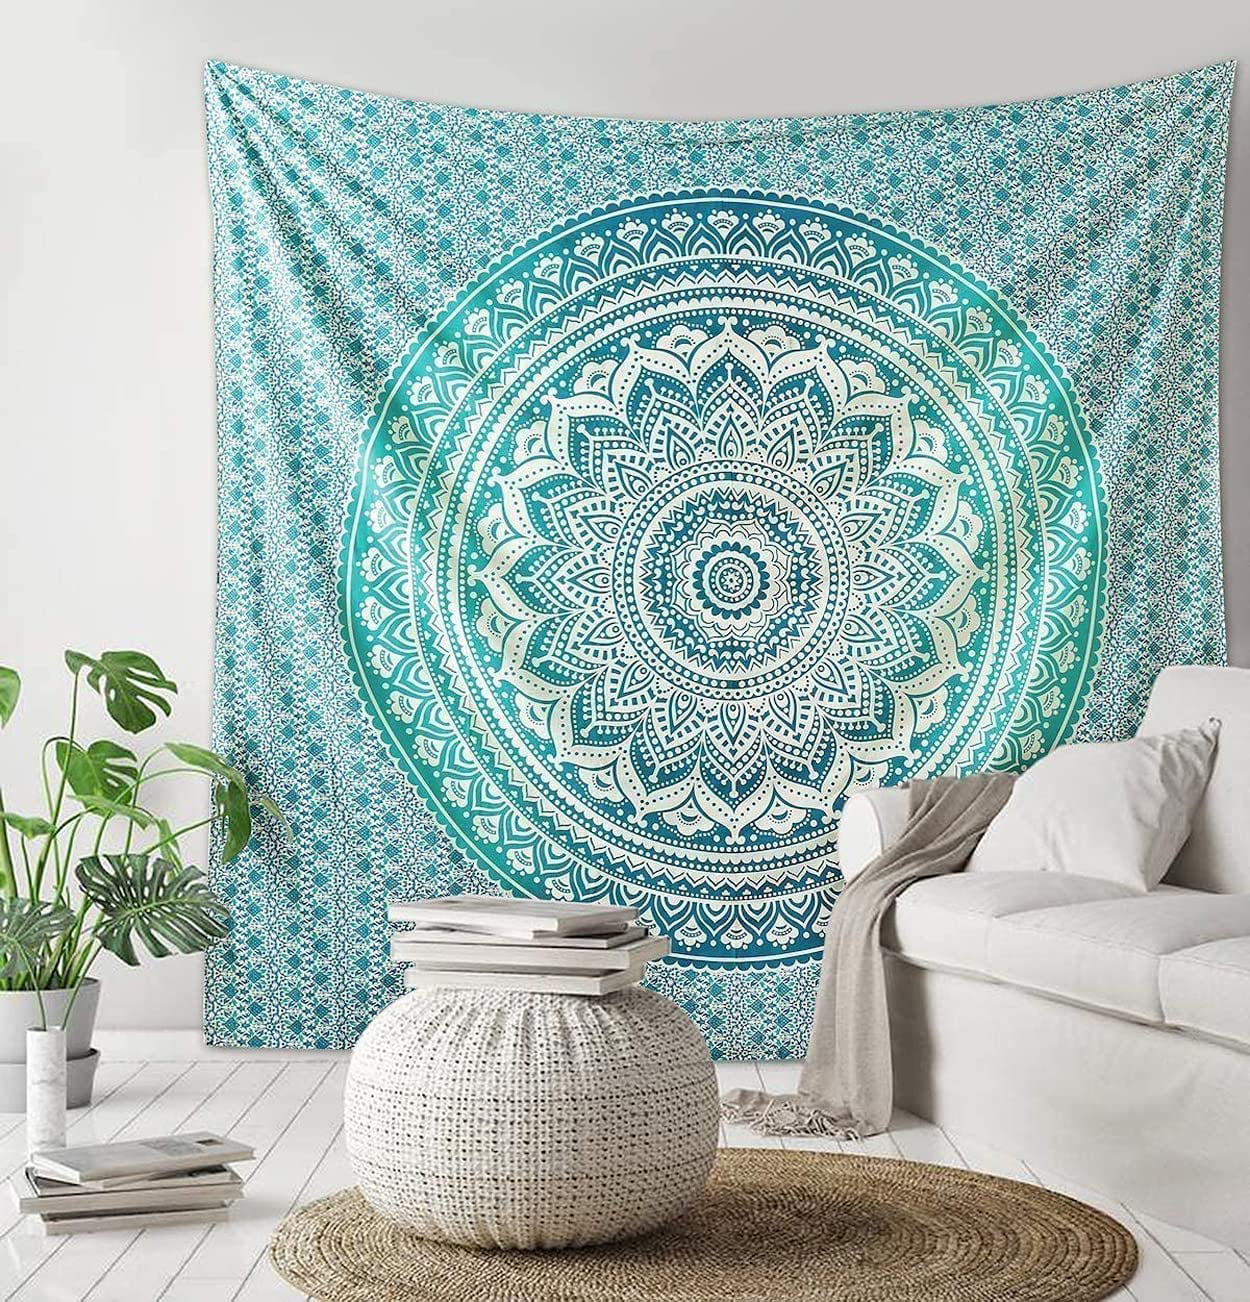 Ombre Bohemian Mandala Hippies Wall Tapestry Round Beach Bedspread Yoga Mat Red 